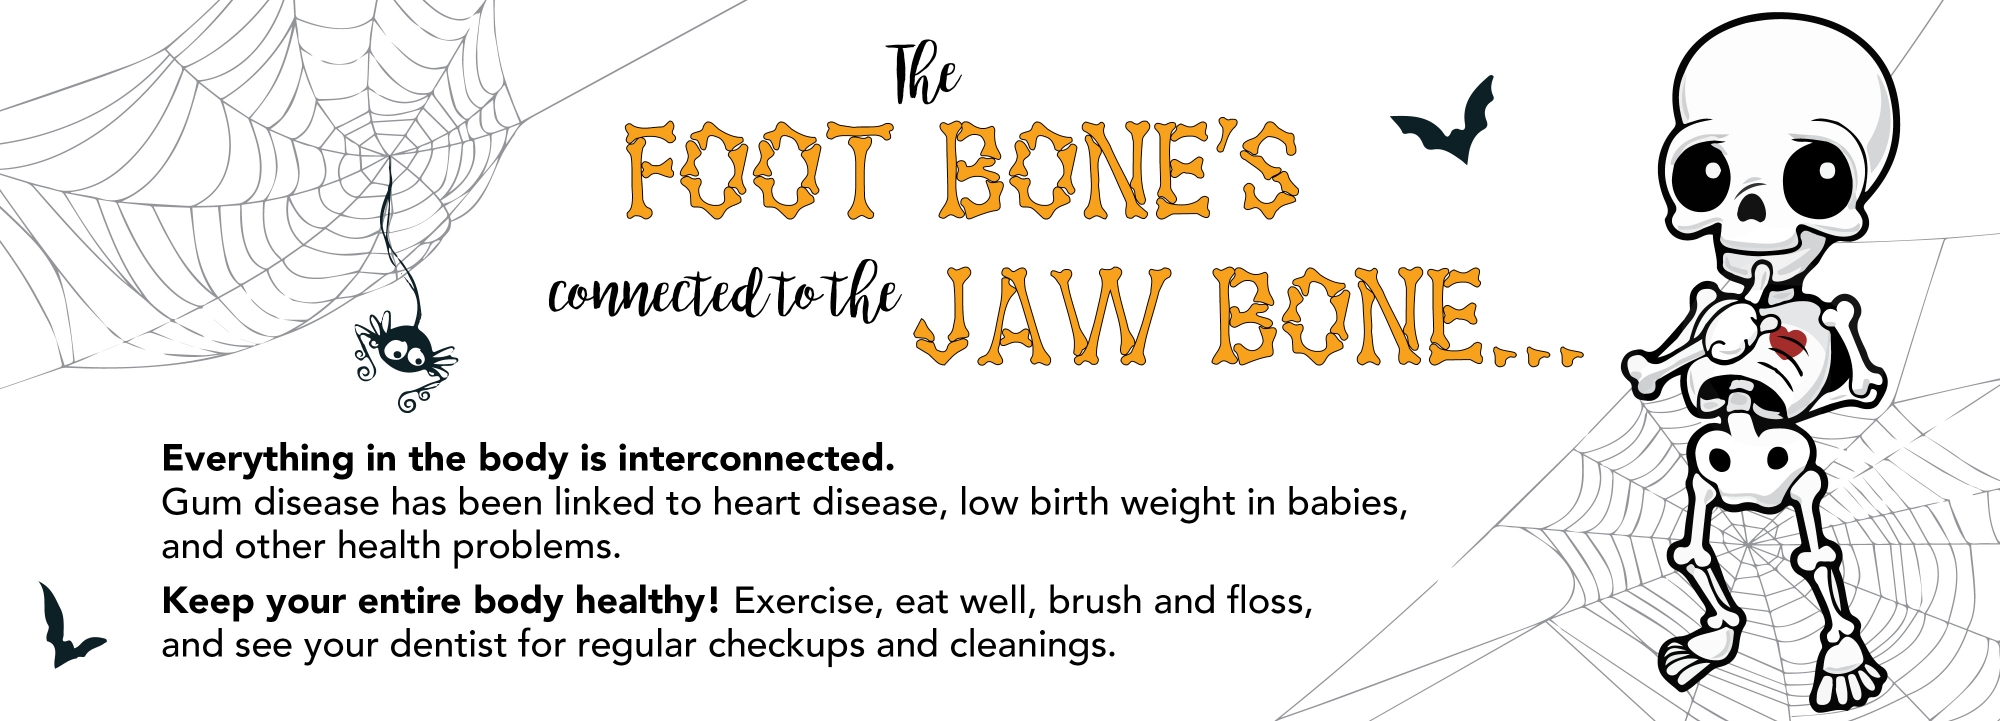 Foot Bone connected to the Jaw Bone